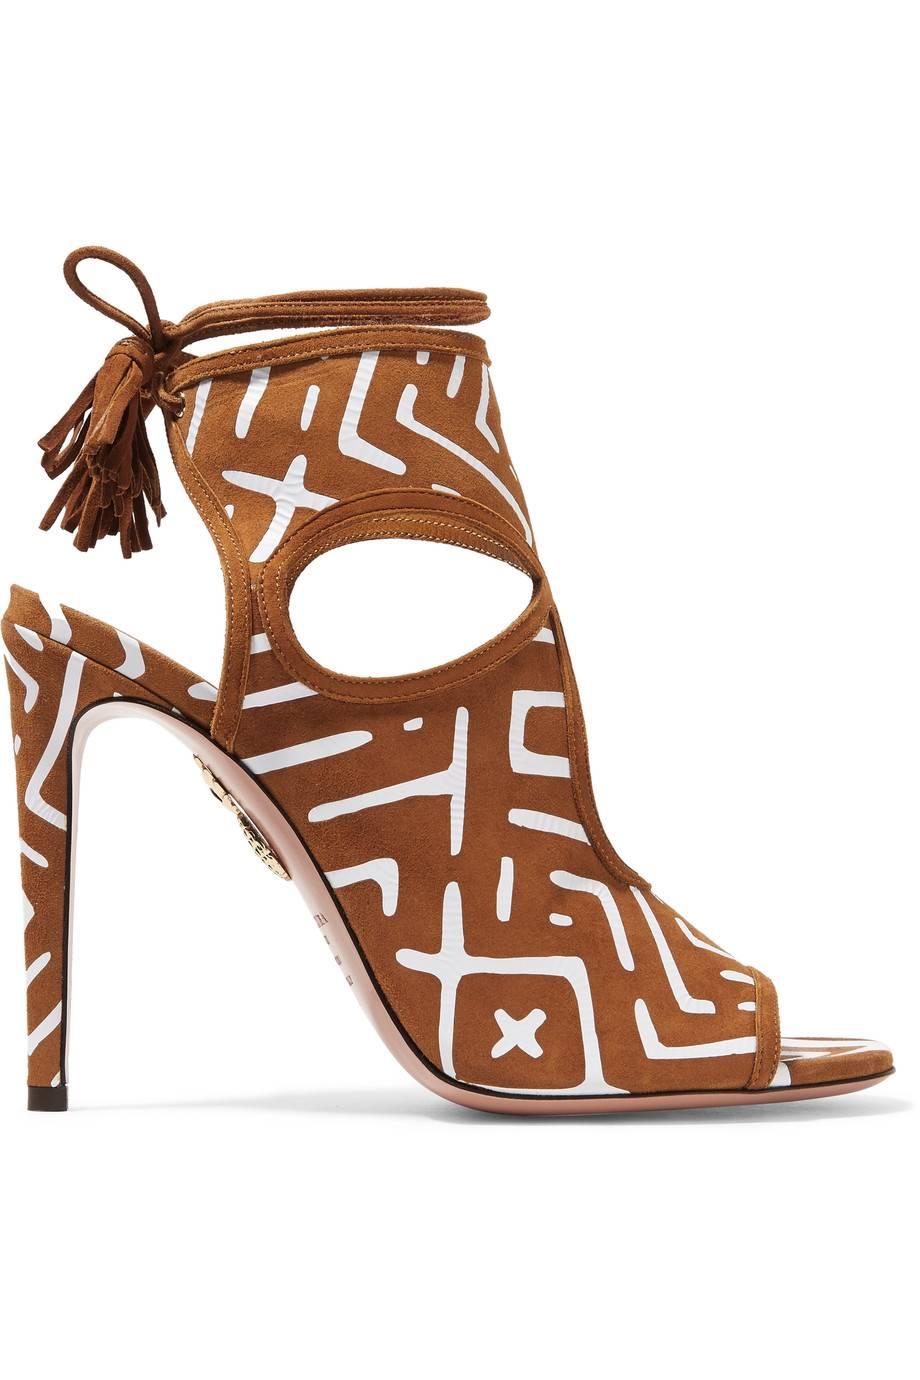 Brown Aquazzura New Cognac Tribal Cashmere Suede Cut Out Lace Up Sandals Heels in Box